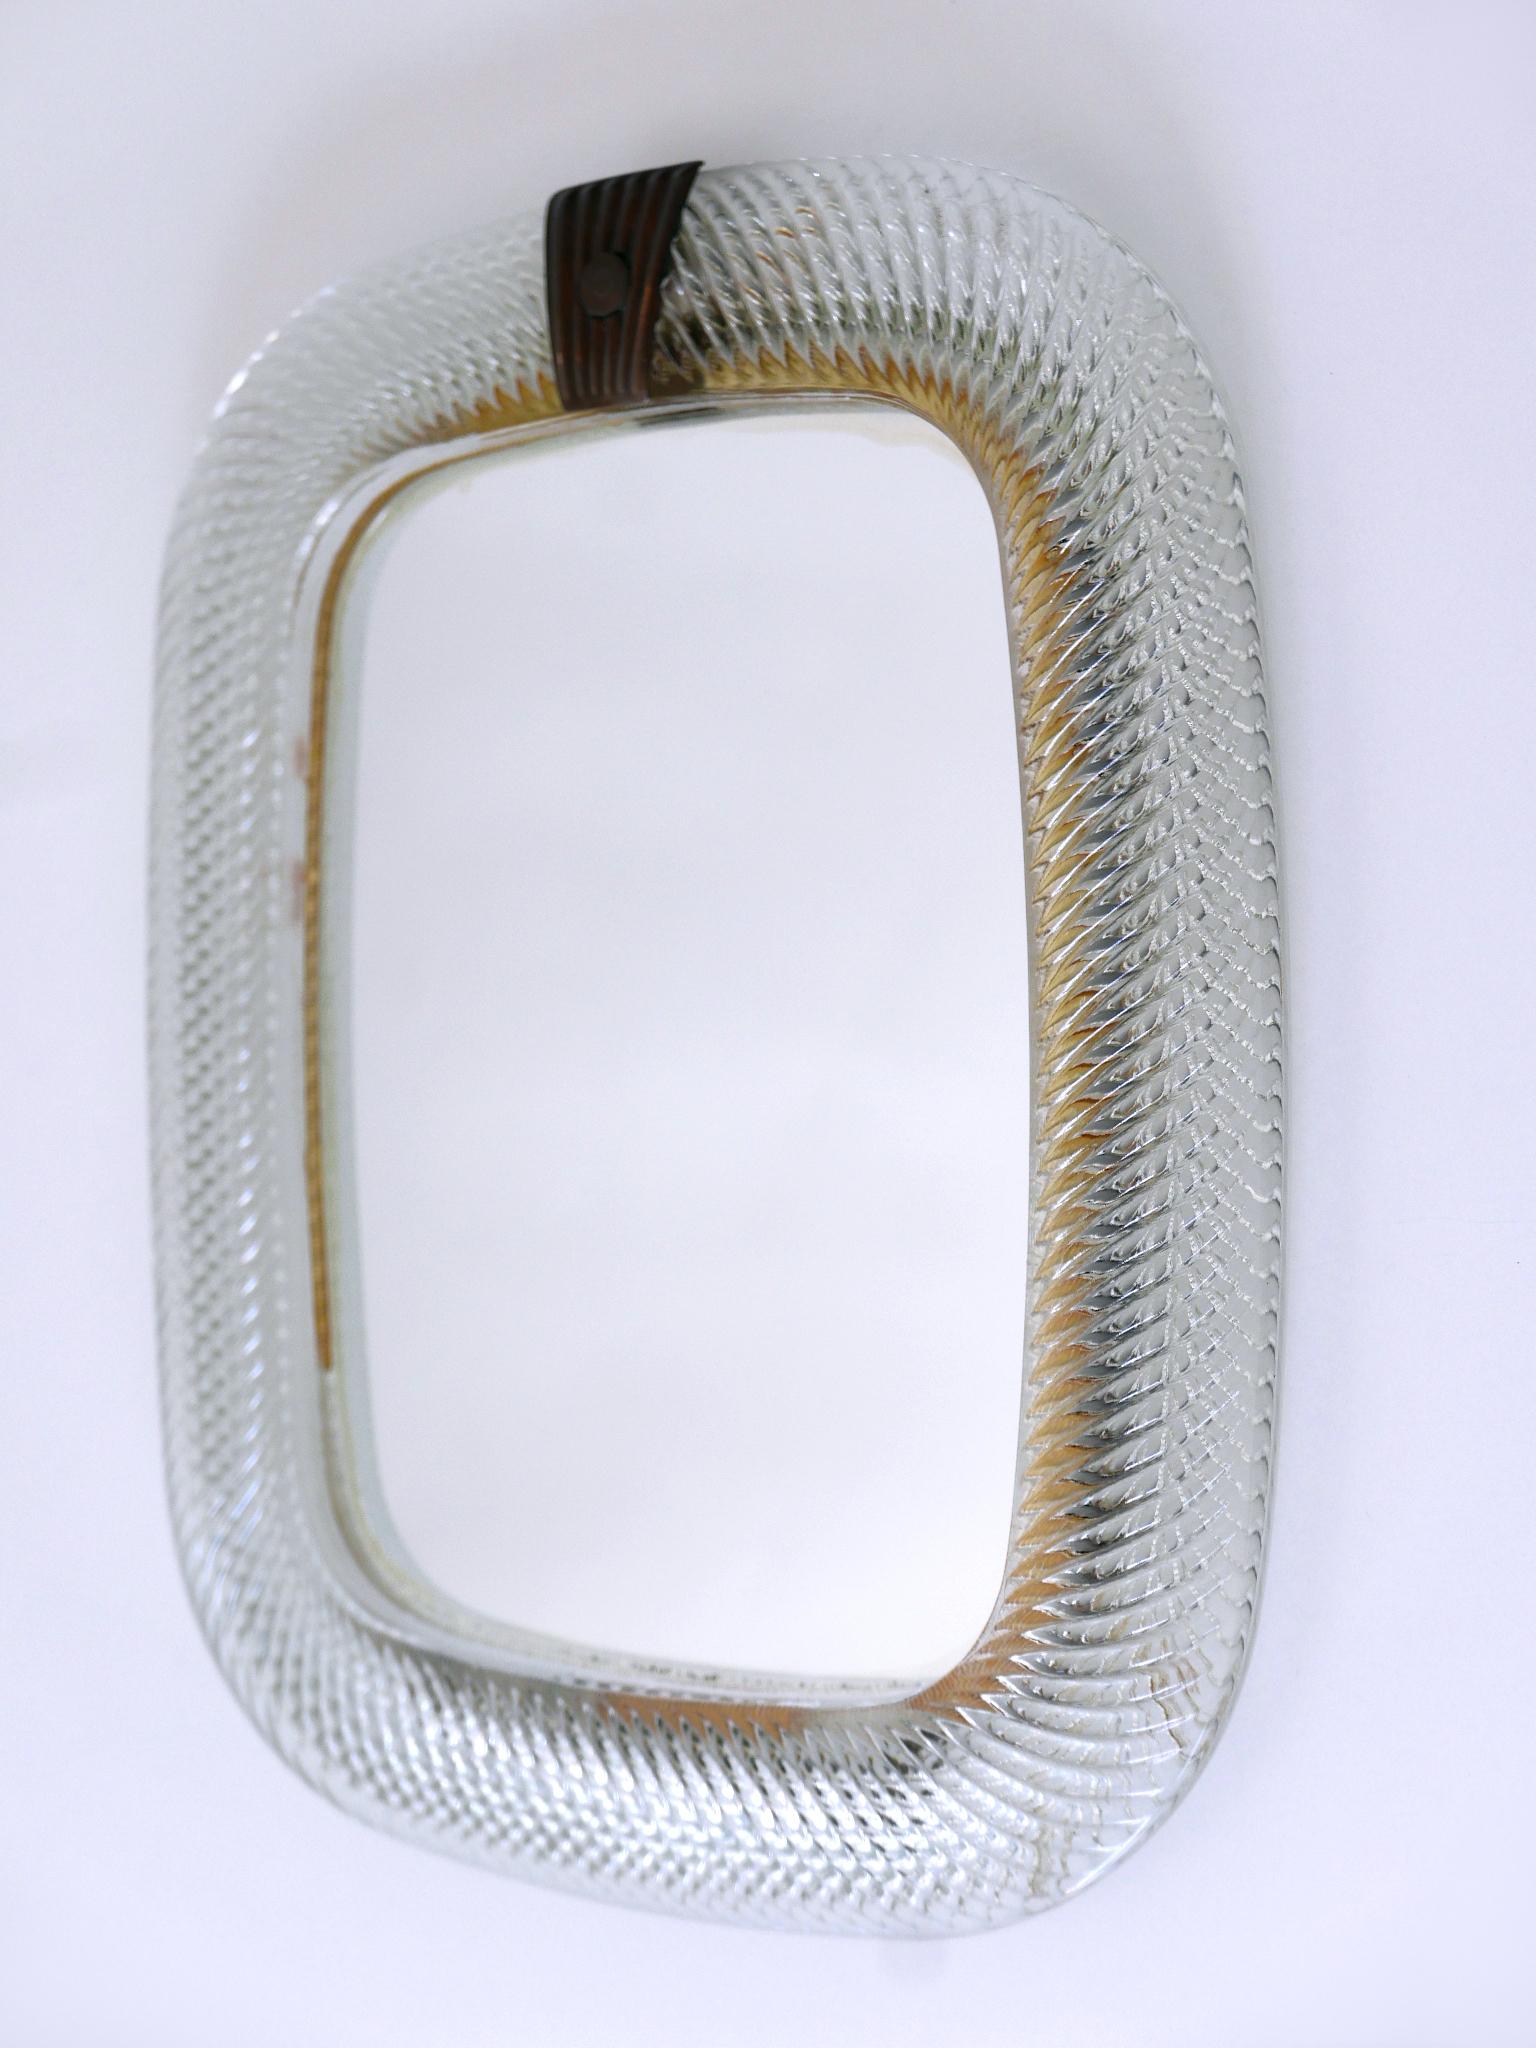 Elegant Mid-Century Modern Wall or Vanity Mirror by Barovier & Toso Italy, 1950s For Sale 9